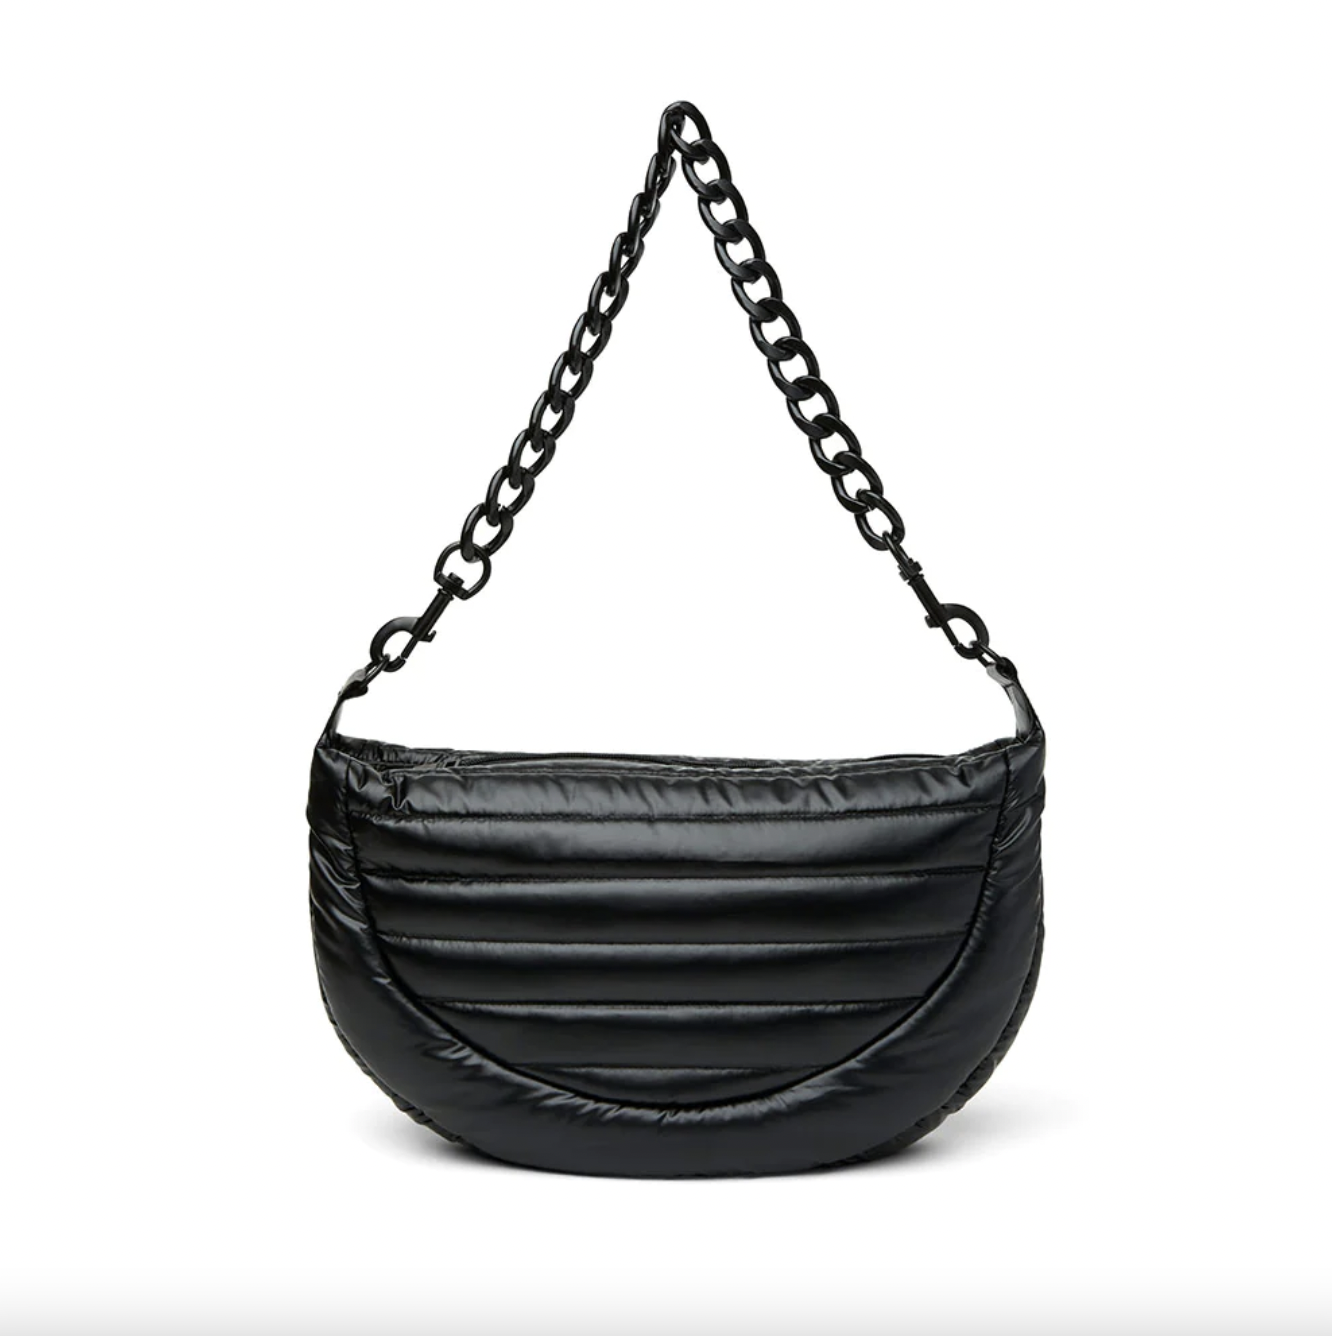 CHANEL  GLOSSY BLACK GABRIELLE HOBO BAG IN NATURAL